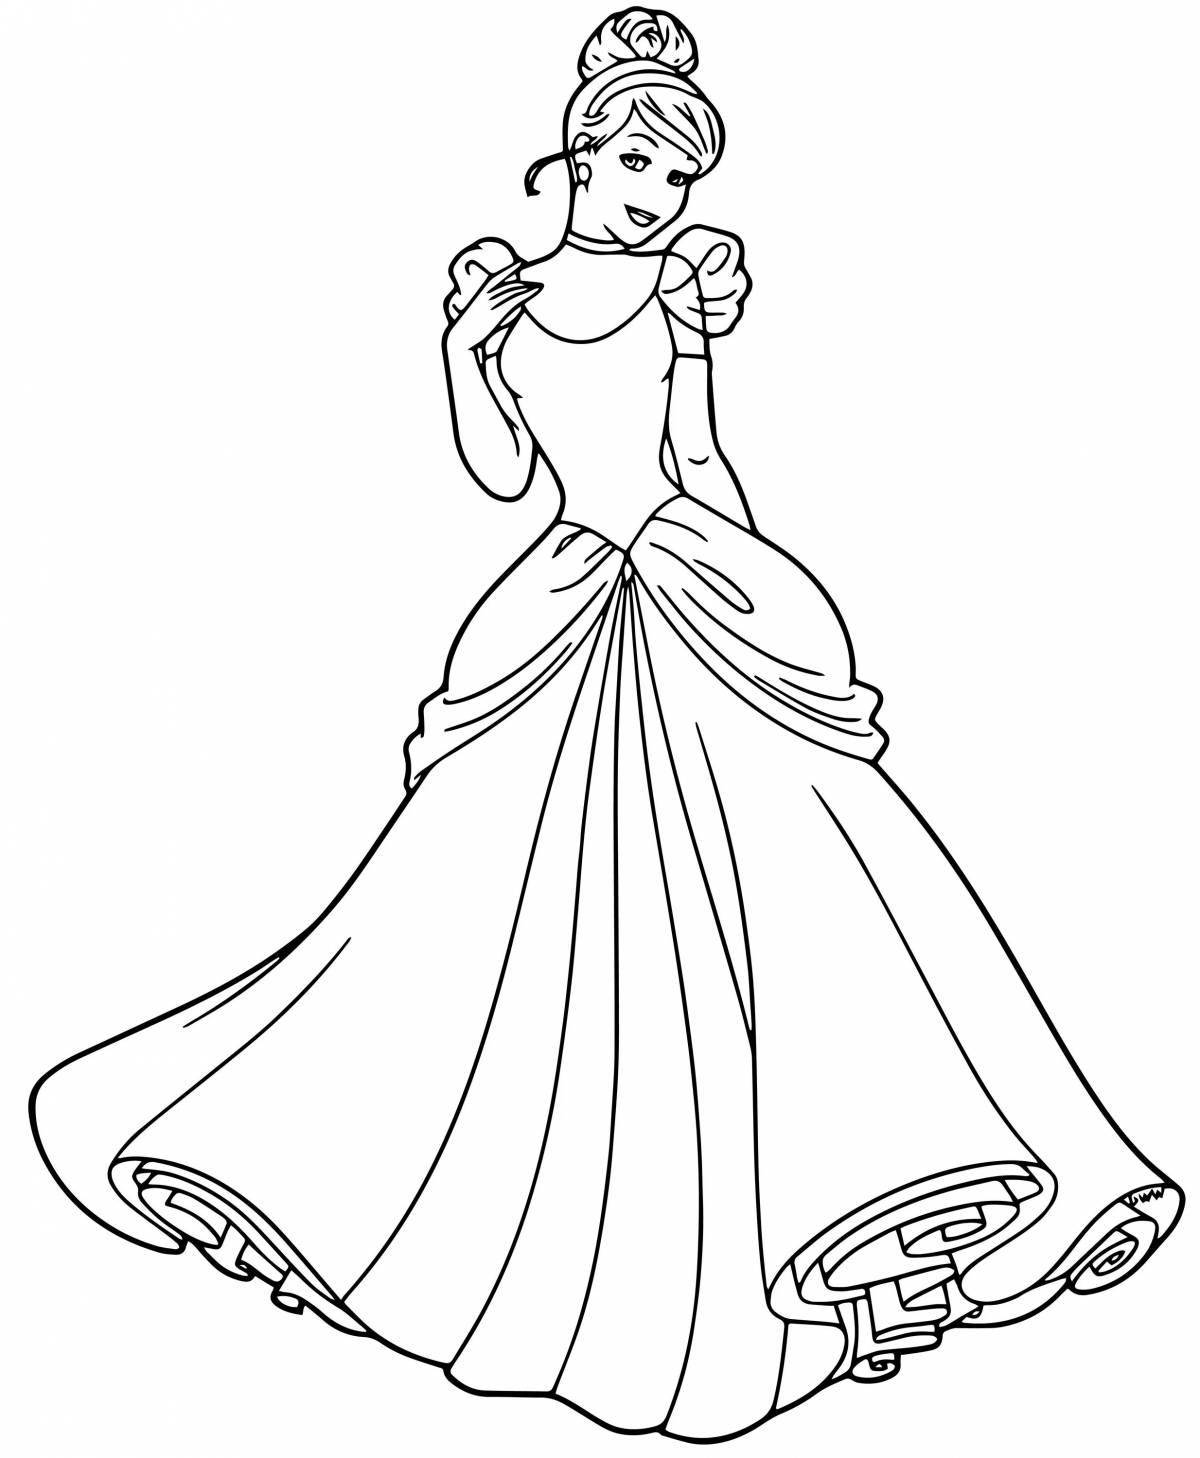 Great Cinderella coloring book for kids